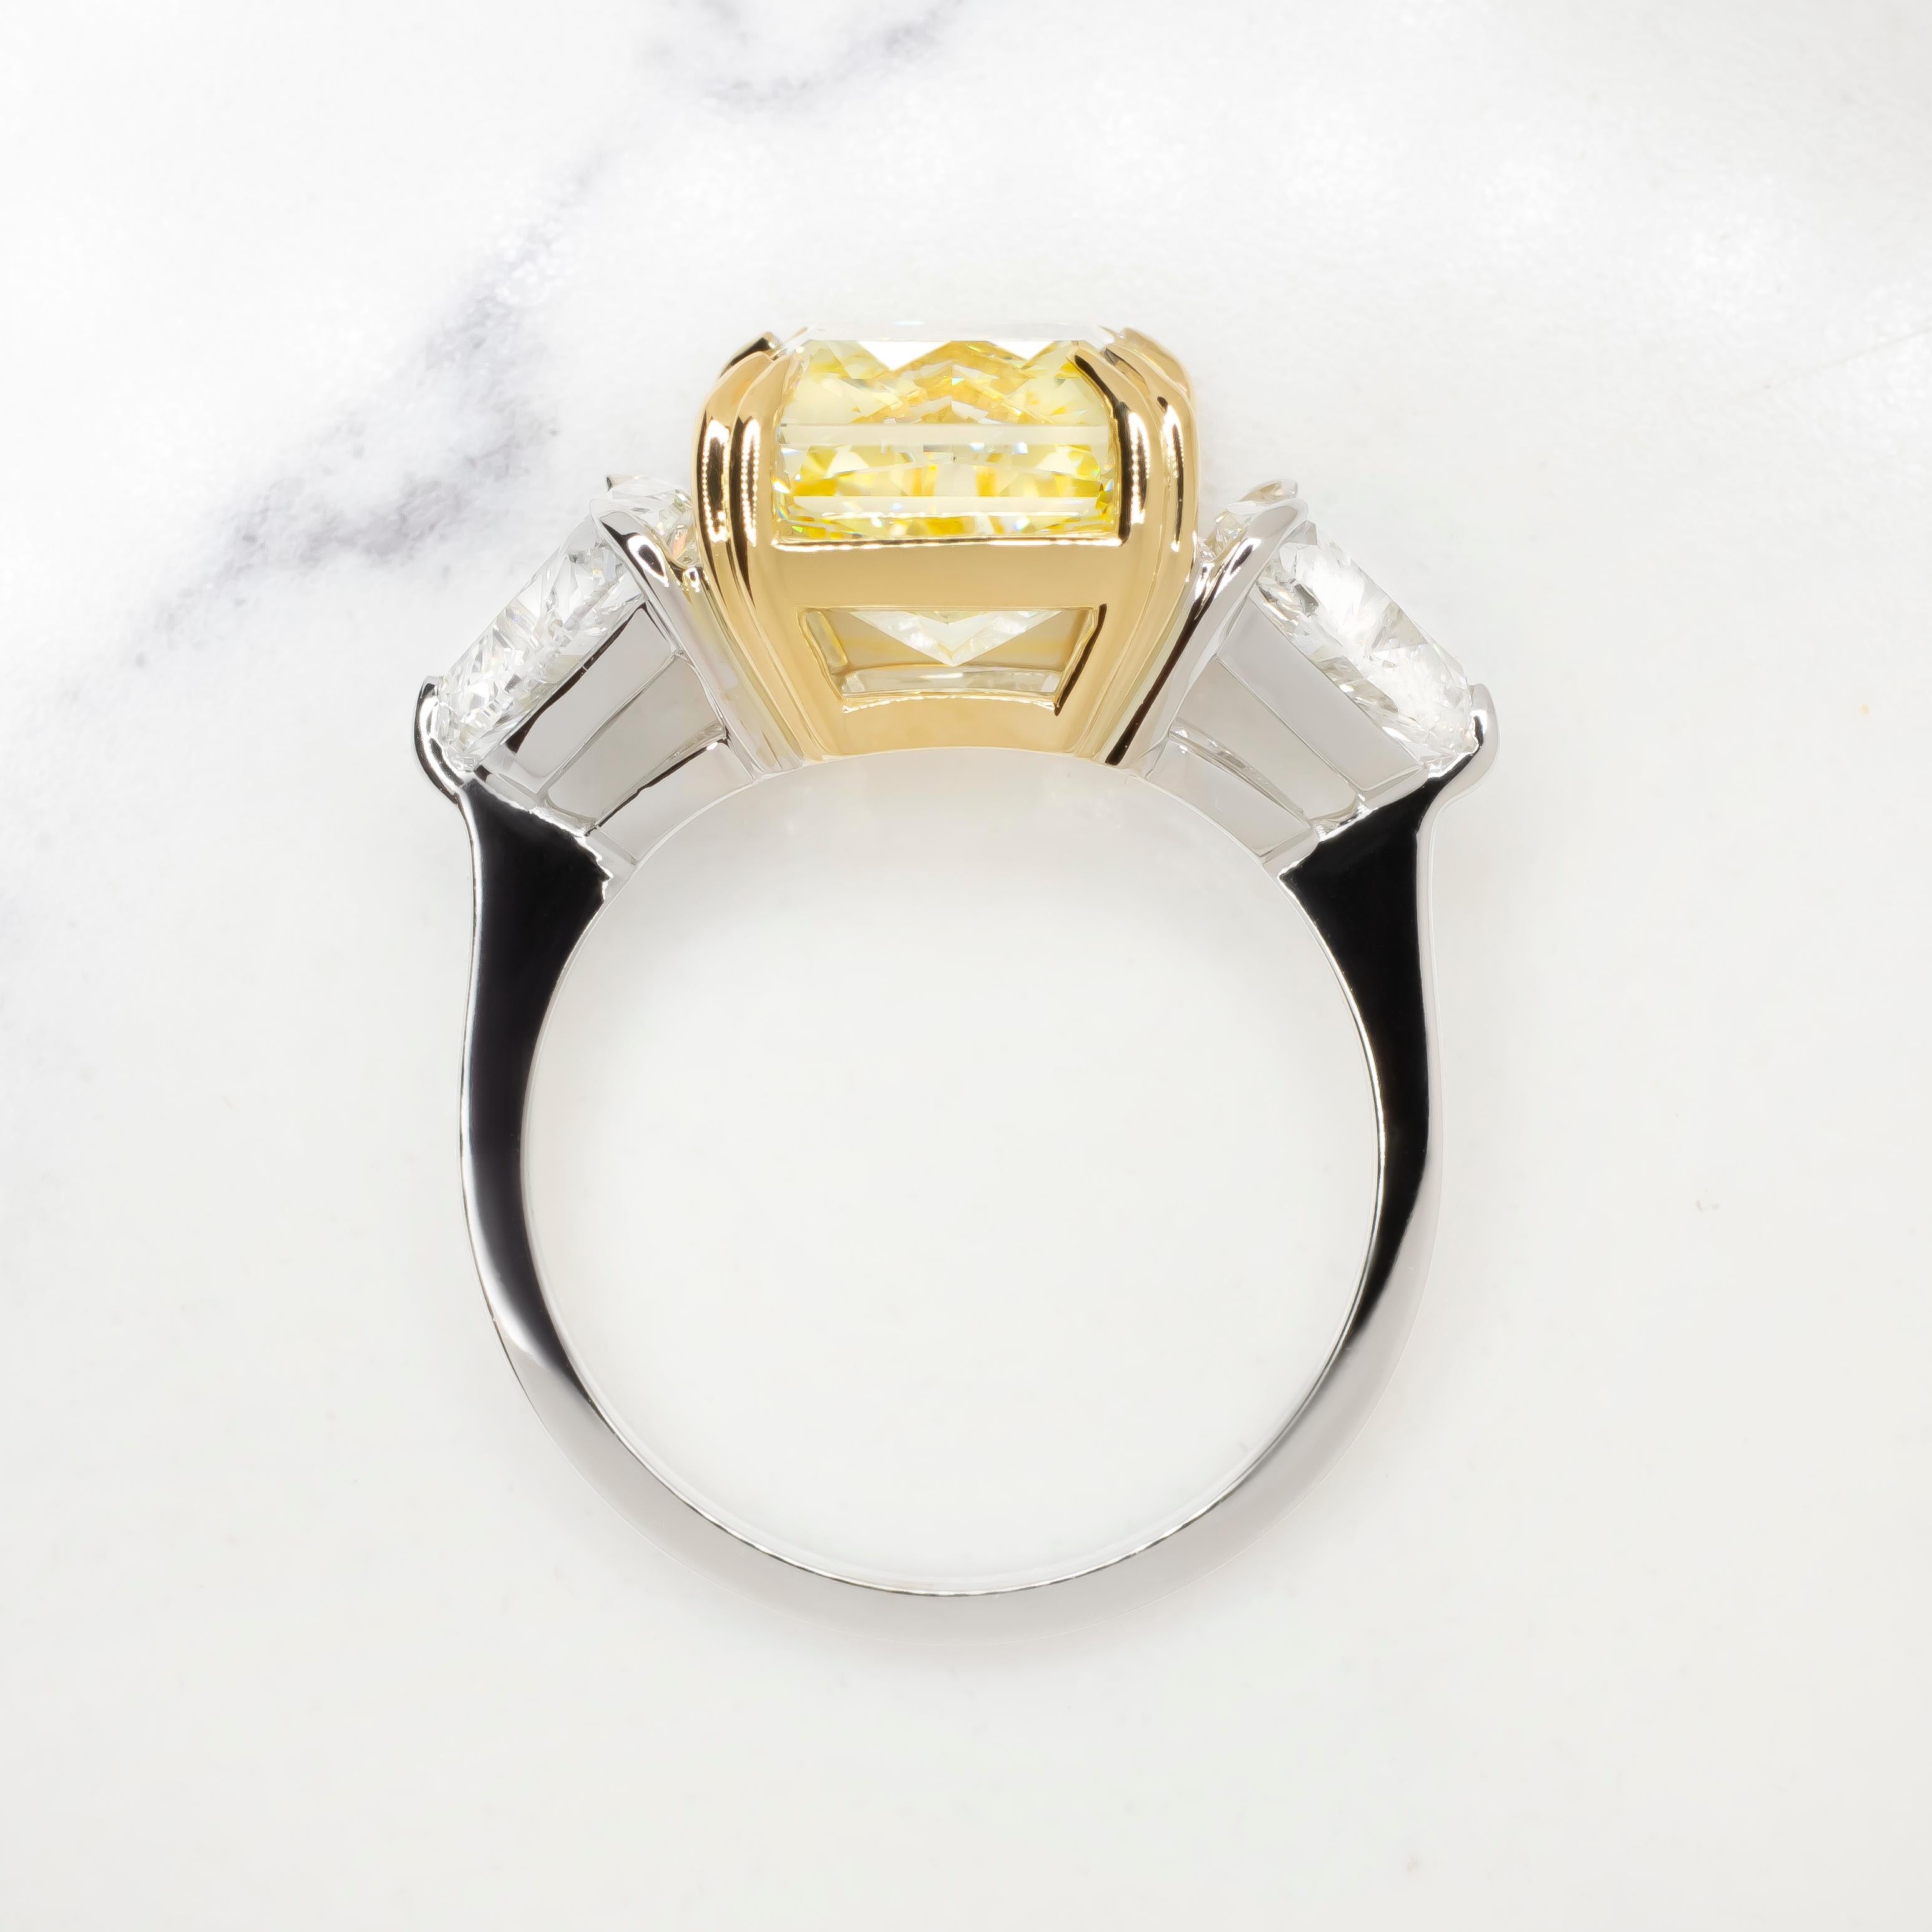 Modern EXCEPTIONAL GIA Certified 8 Carat VVS2 Fancy Yellow Diamond Ring For Sale